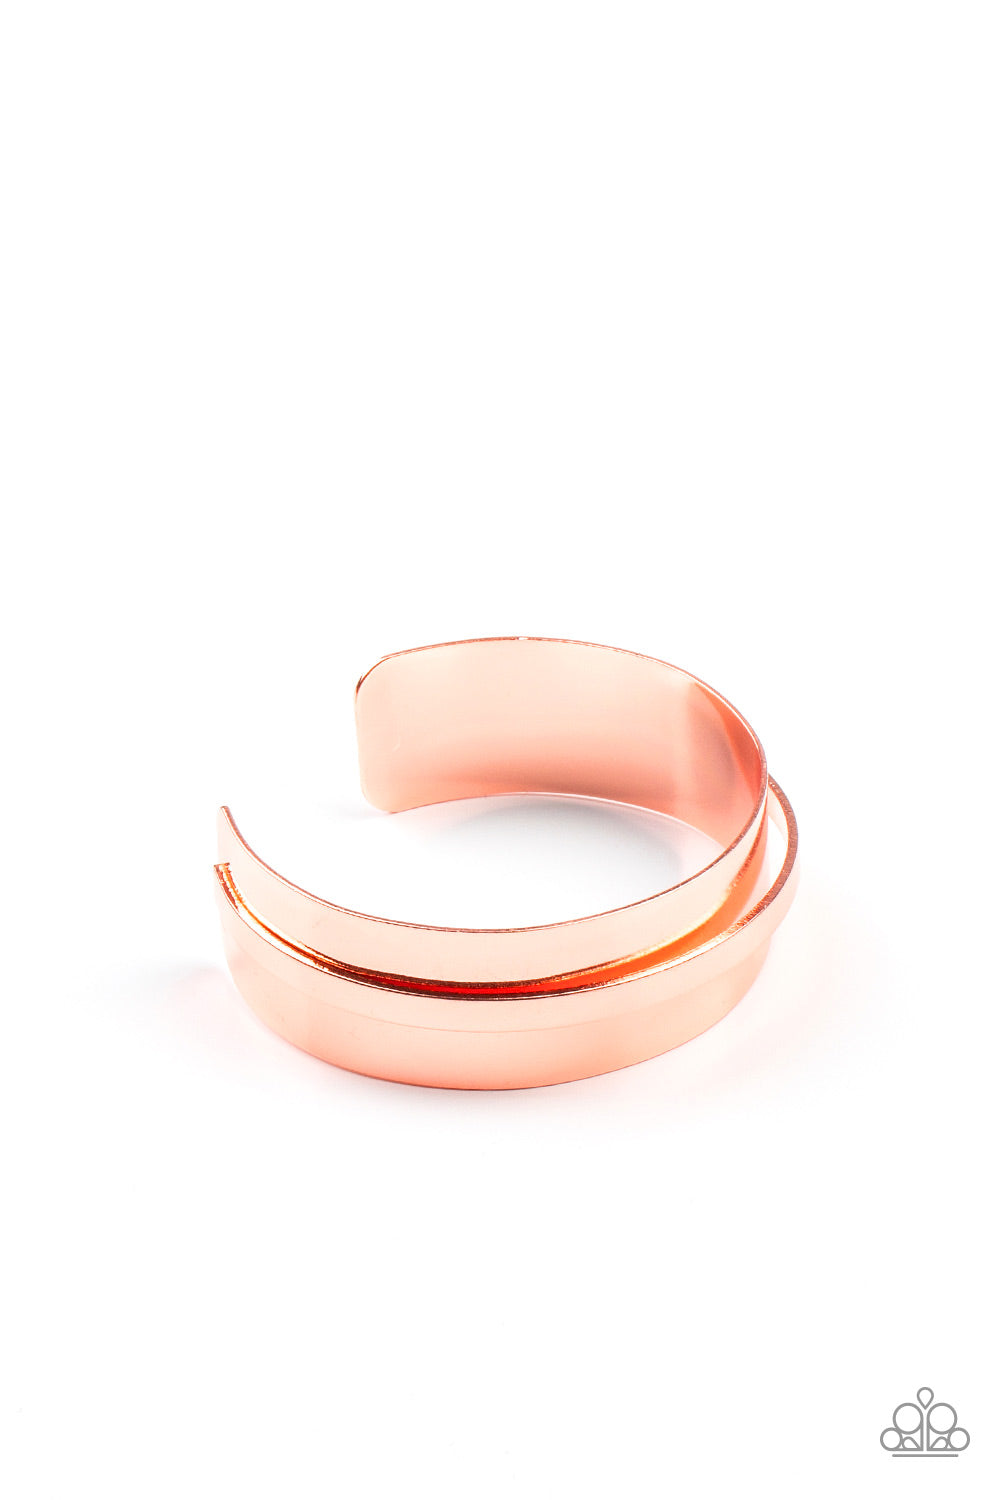 A flat shiny copper bar curves around the center of a thick shiny copper cuff, creating a chic stacked look.